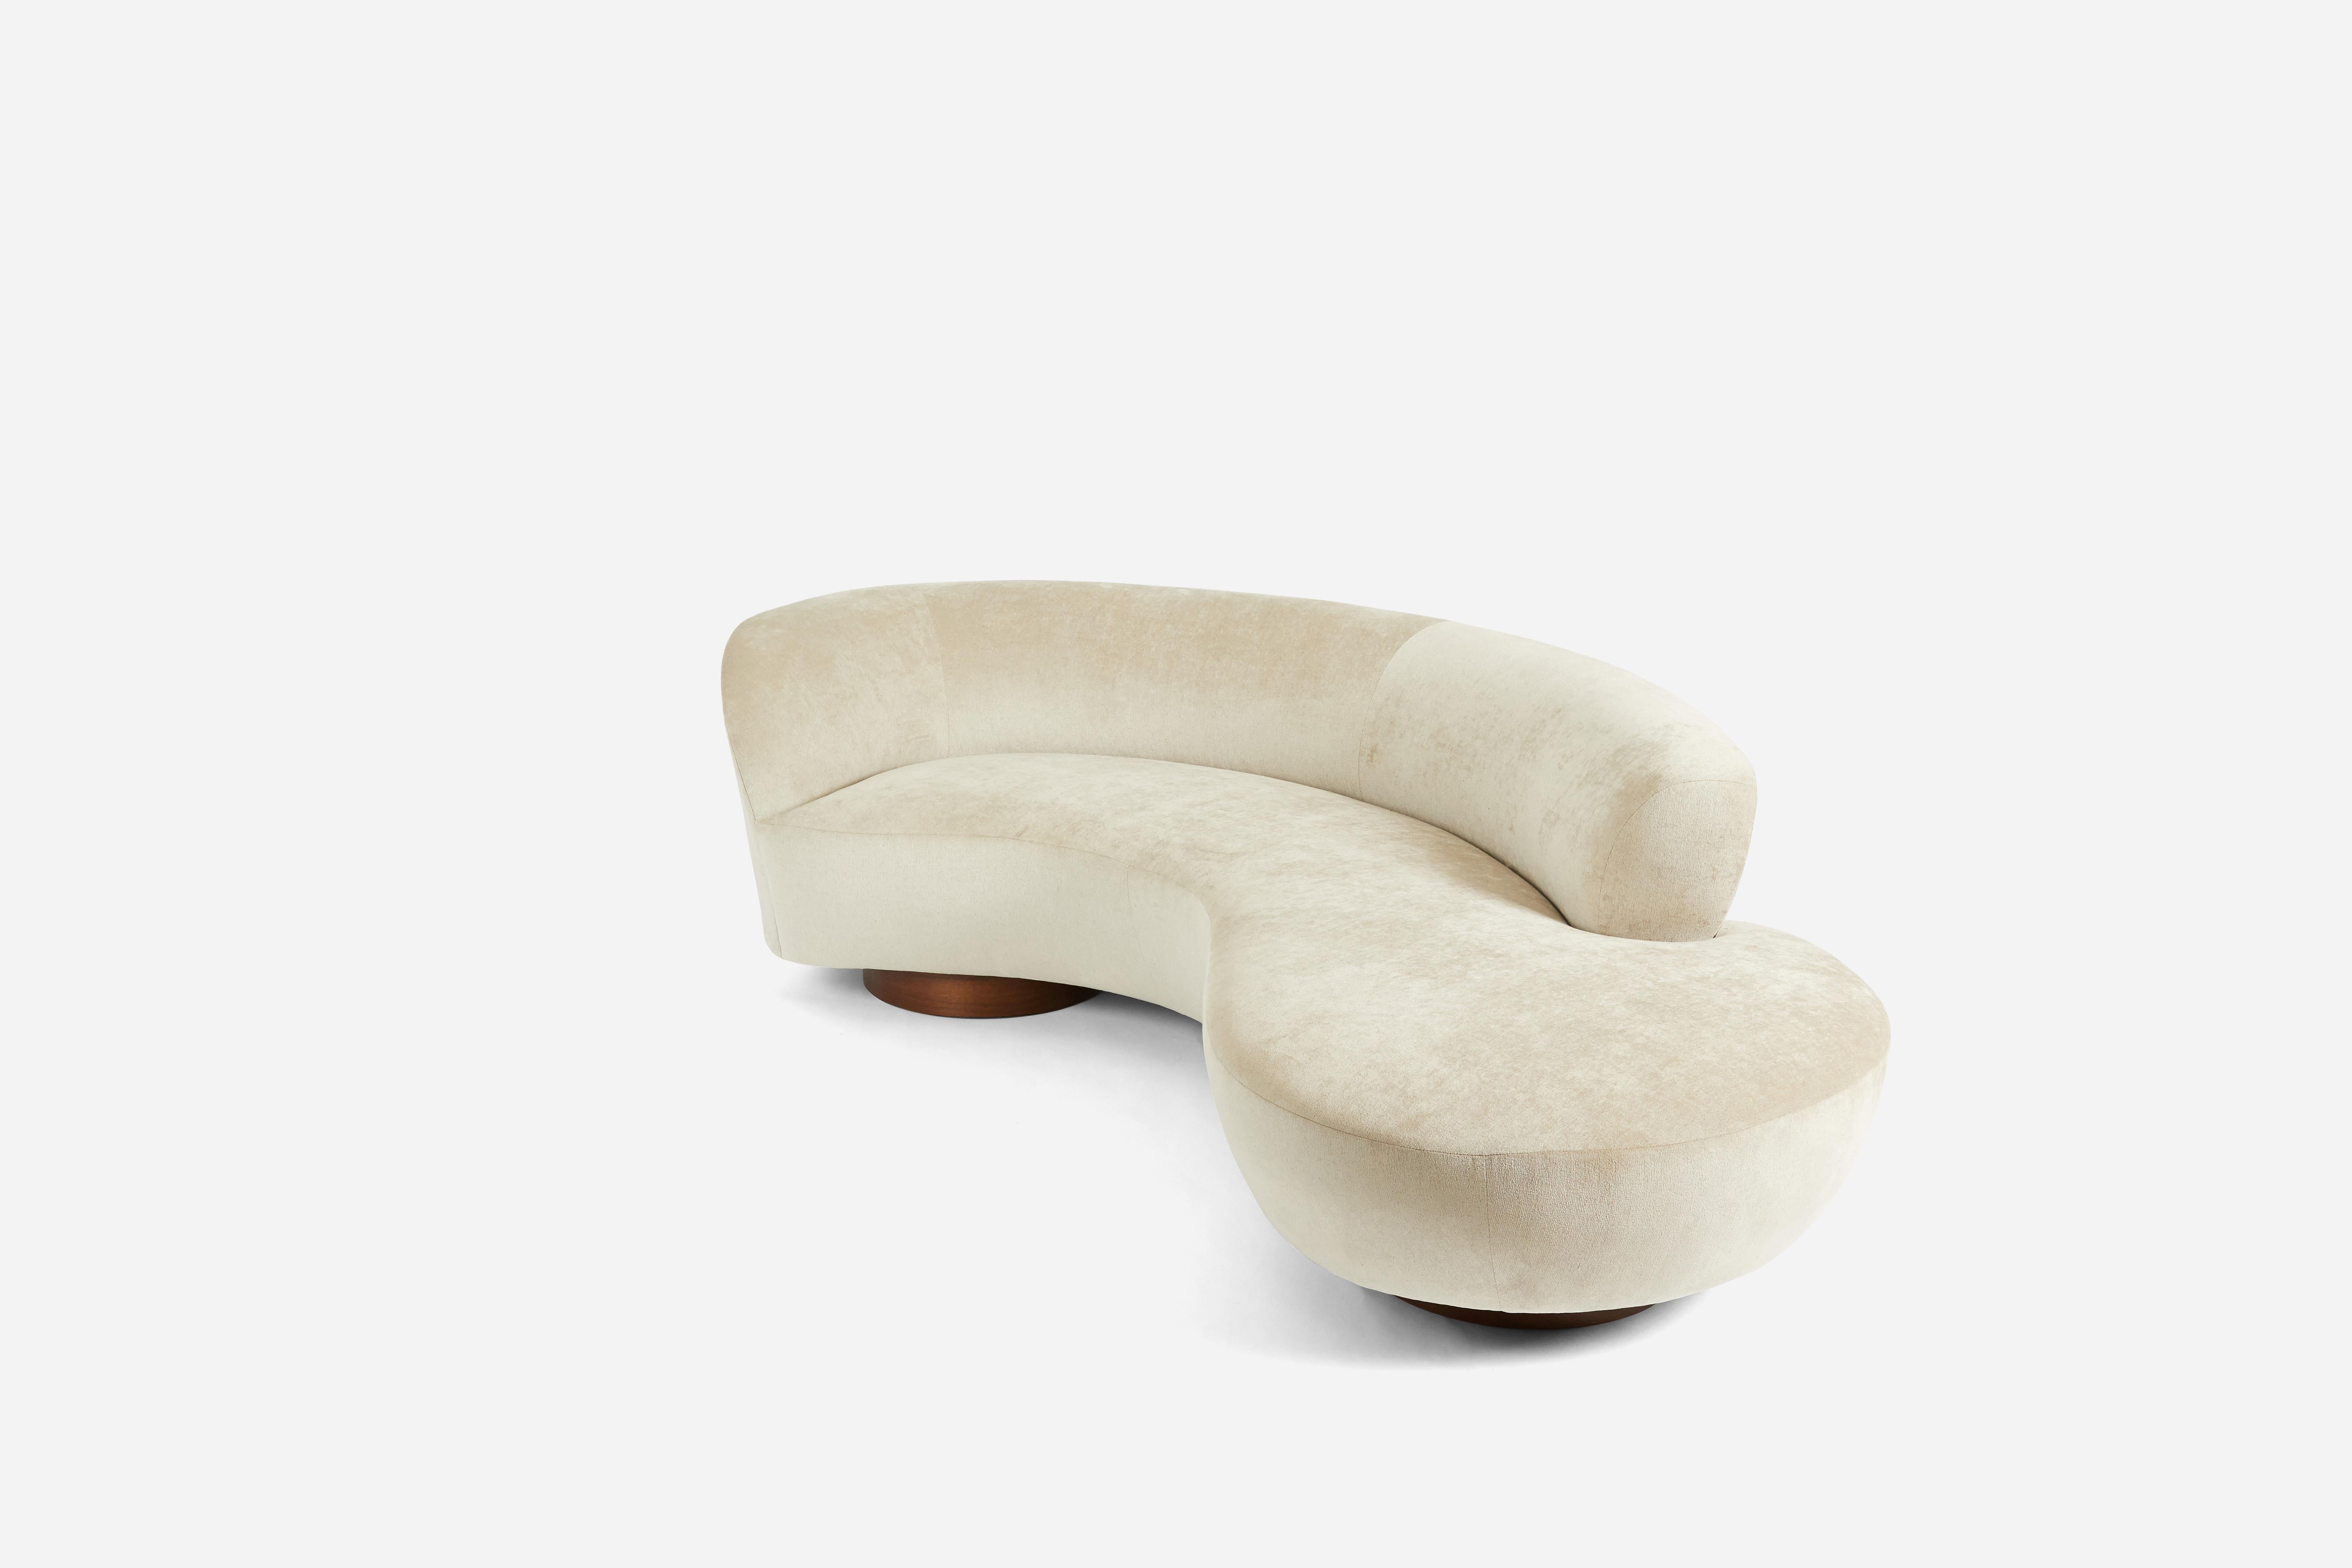 Cloud sofa by Vladimir Kagan for Directional Furniture. Fully restored. Refinished walnut base. New upholstery.